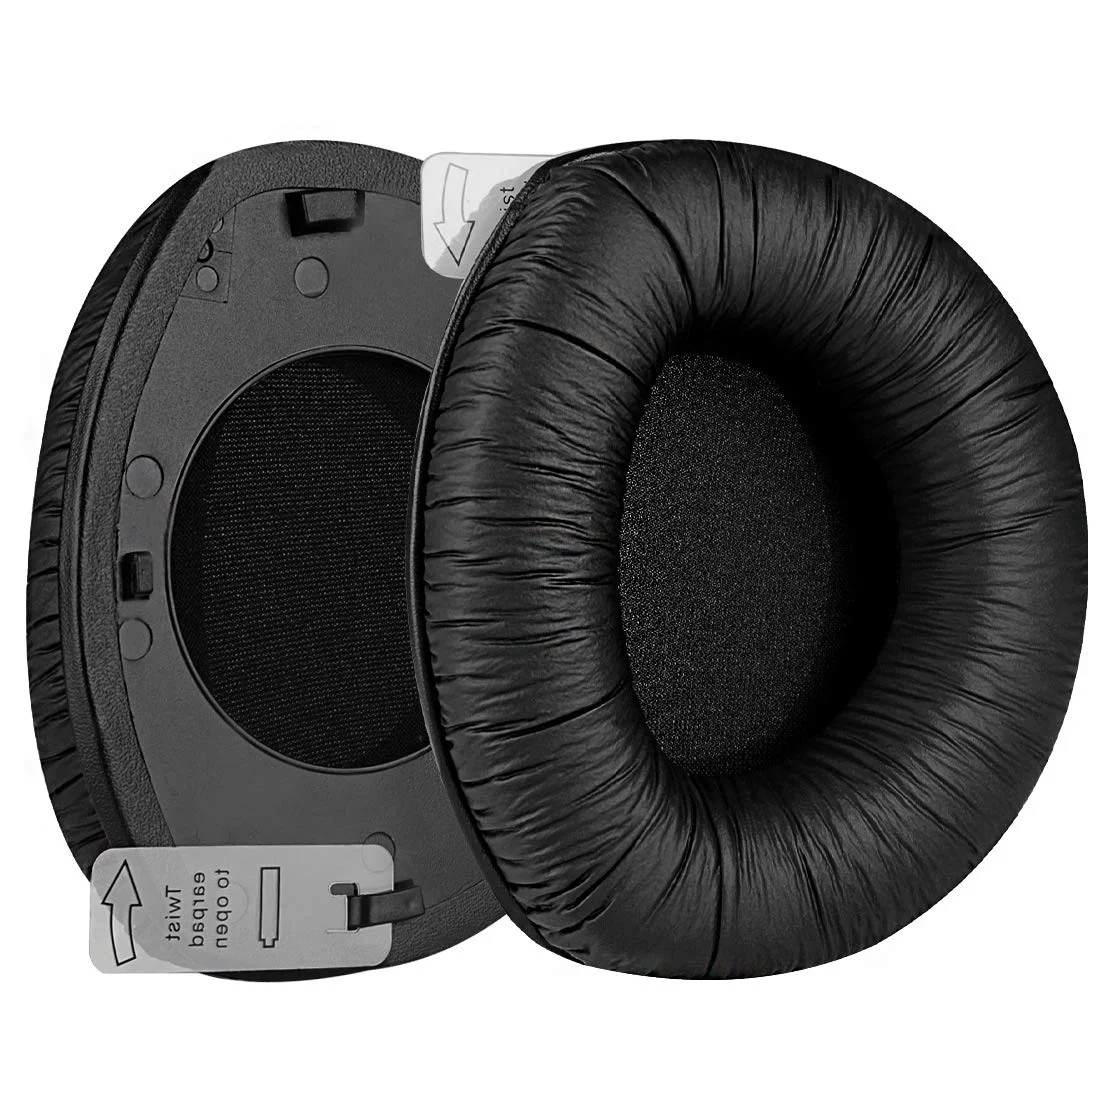 

Replacement Earpads Ear Pads Muffs Cup Pillow Cushions Headband For Sennheiser HDR160 HDR170 HDR180 RS160 RS170 RS180 Headphones